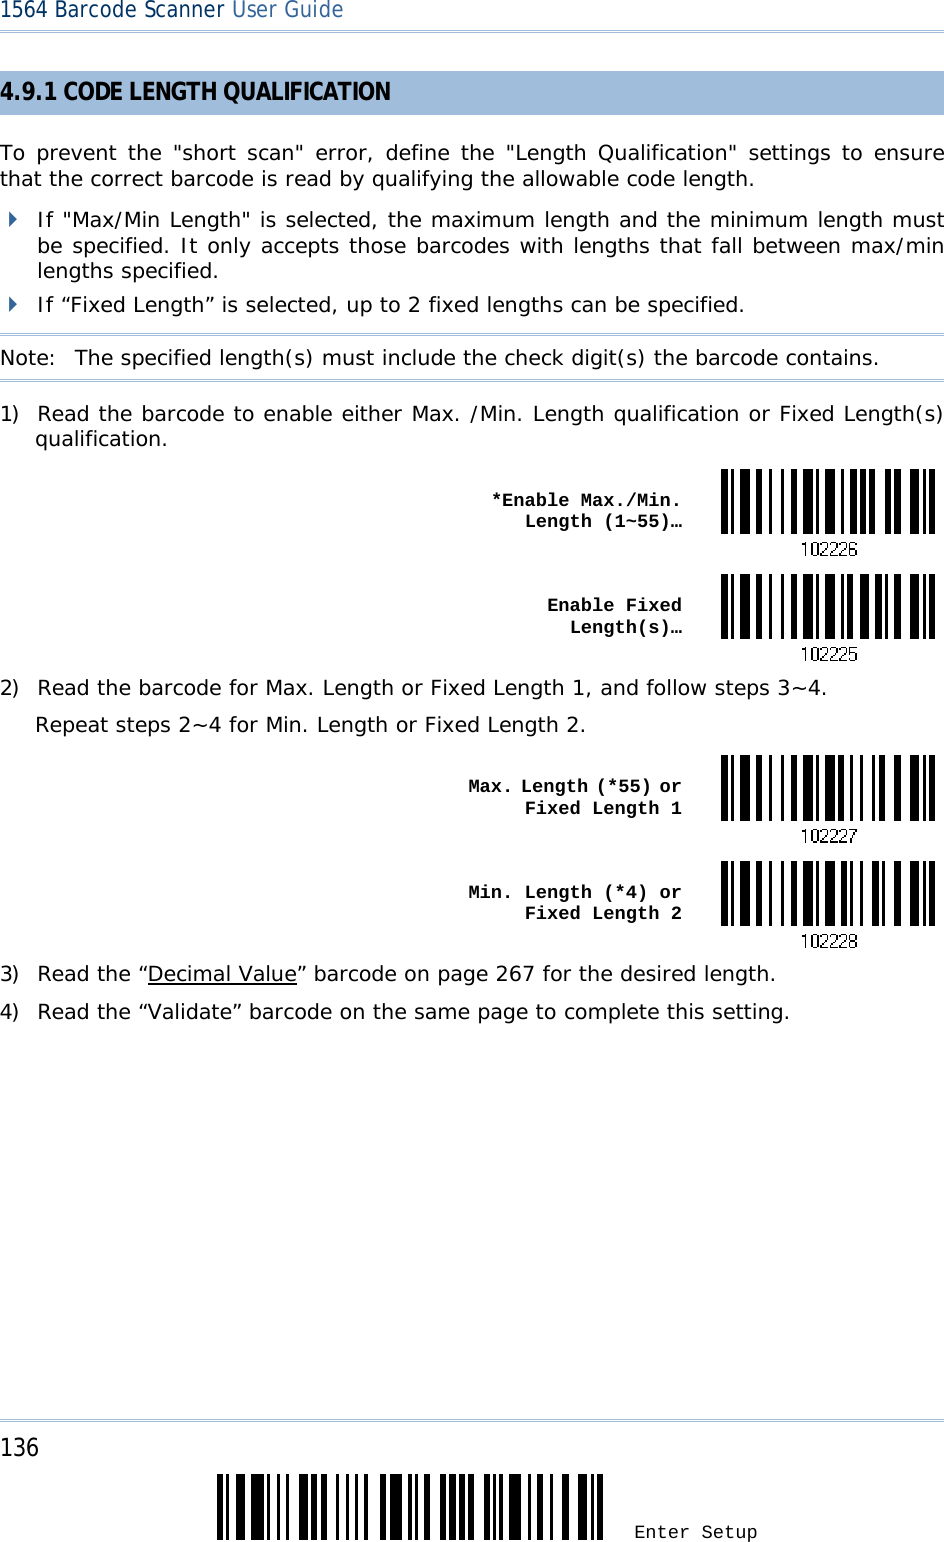 136 Enter Setup 1564 Barcode Scanner User Guide  4.9.1 CODE LENGTH QUALIFICATION To prevent the &quot;short scan&quot; error, define the &quot;Length Qualification&quot; settings to ensure that the correct barcode is read by qualifying the allowable code length.  If &quot;Max/Min Length&quot; is selected, the maximum length and the minimum length must be specified. It only accepts those barcodes with lengths that fall between max/min lengths specified.  If “Fixed Length” is selected, up to 2 fixed lengths can be specified. Note:   The specified length(s) must include the check digit(s) the barcode contains. 1) Read the barcode to enable either Max. /Min. Length qualification or Fixed Length(s) qualification.  *Enable Max./Min. Length (1~55)… Enable Fixed Length(s)…2) Read the barcode for Max. Length or Fixed Length 1, and follow steps 3~4. Repeat steps 2~4 for Min. Length or Fixed Length 2.  Max. Length (*55) or Fixed Length 1 Min. Length (*4) or Fixed Length 23) Read the “Decimal Value” barcode on page 267 for the desired length.  4) Read the “Validate” barcode on the same page to complete this setting. 